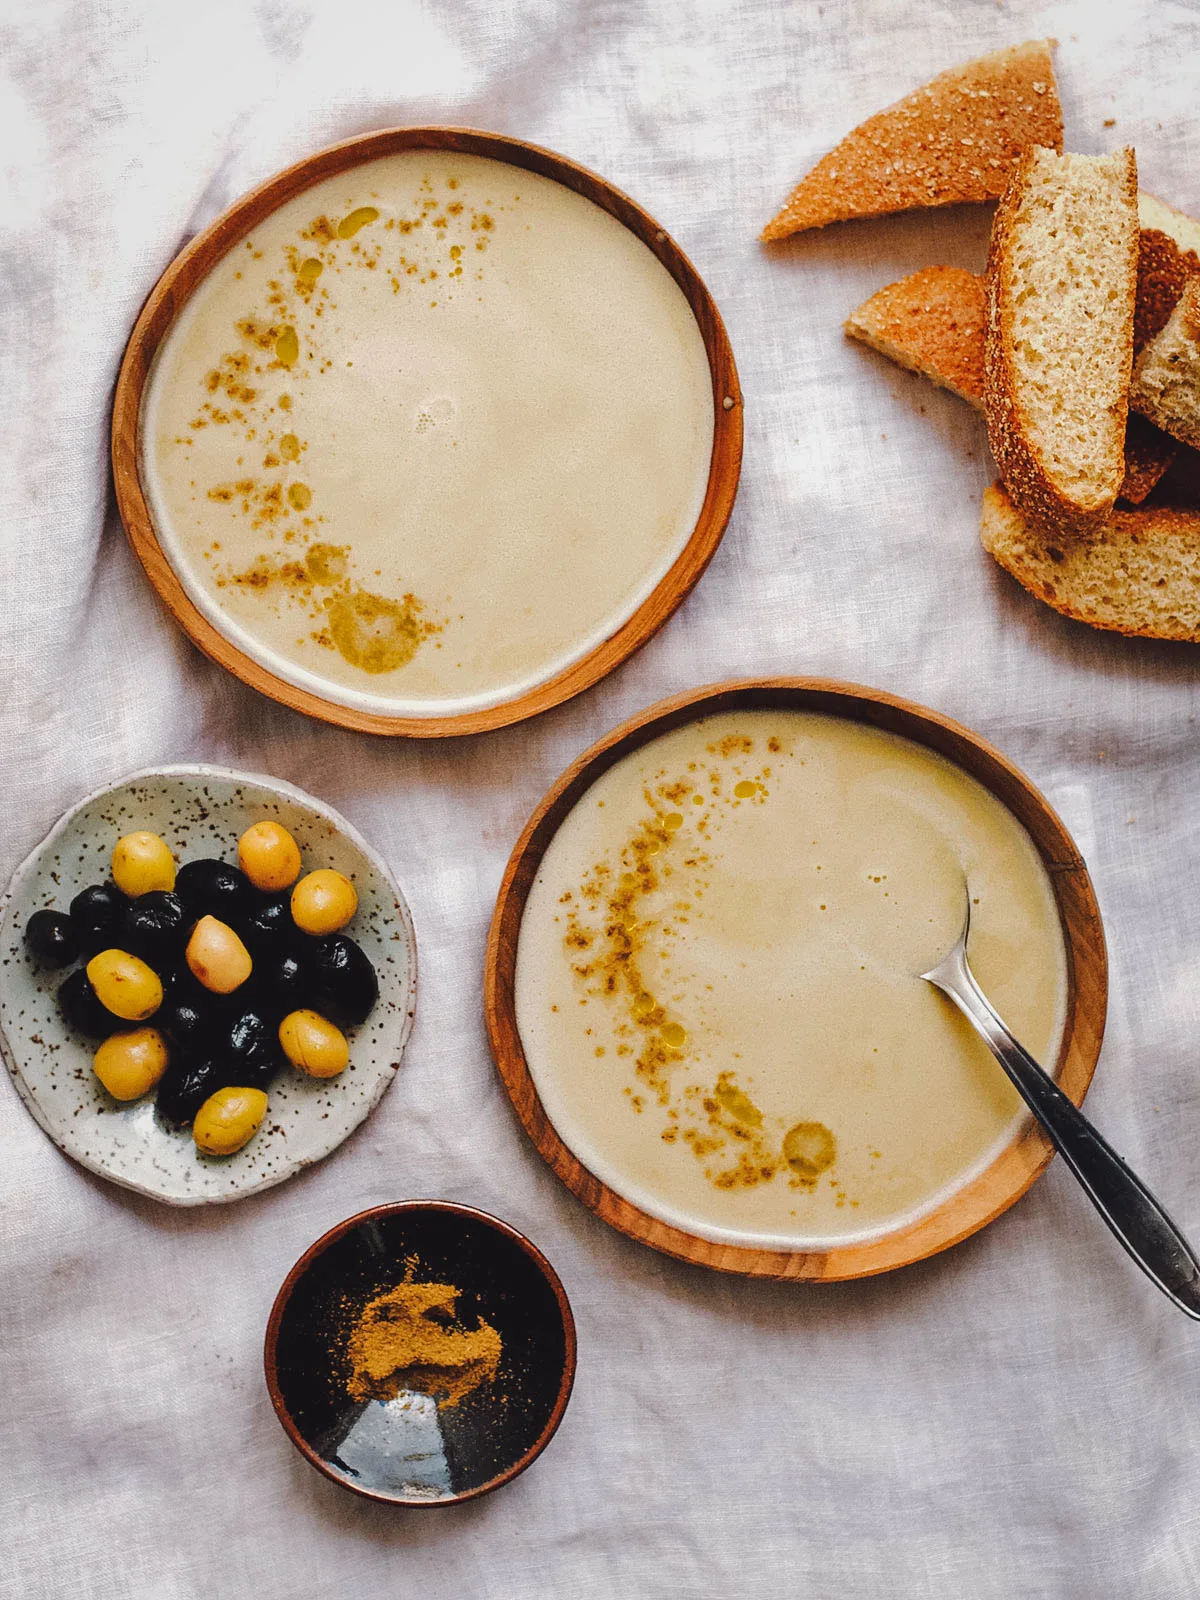 Bissara, a Moroccan soup made with split fava beans or split peas